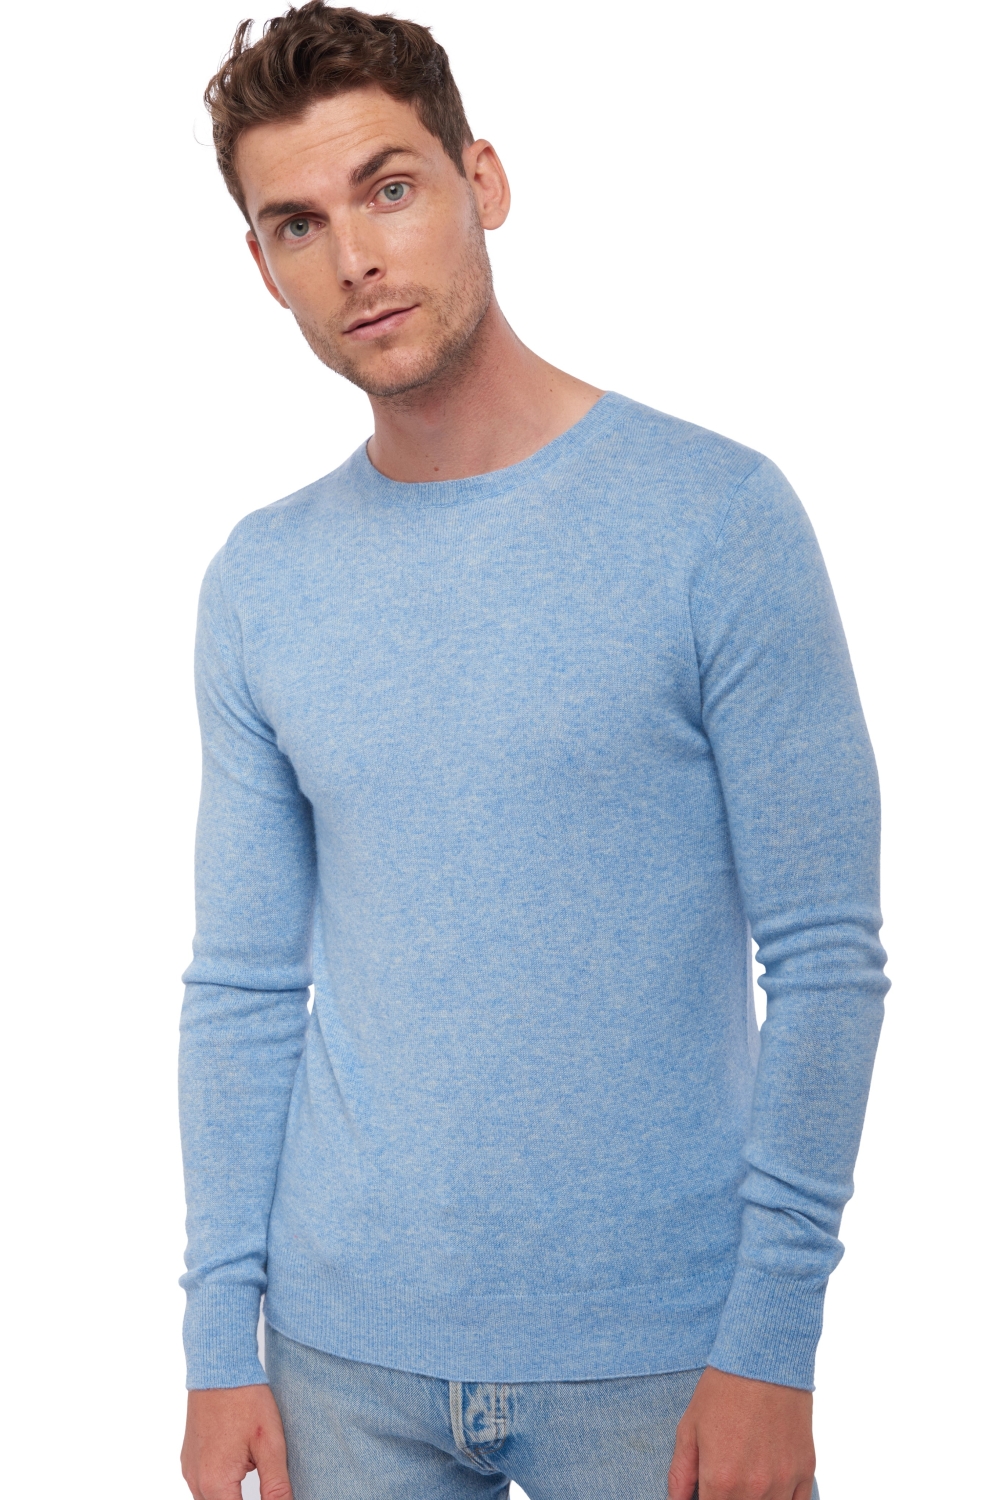 Cashmere men low prices tao first powder blue s